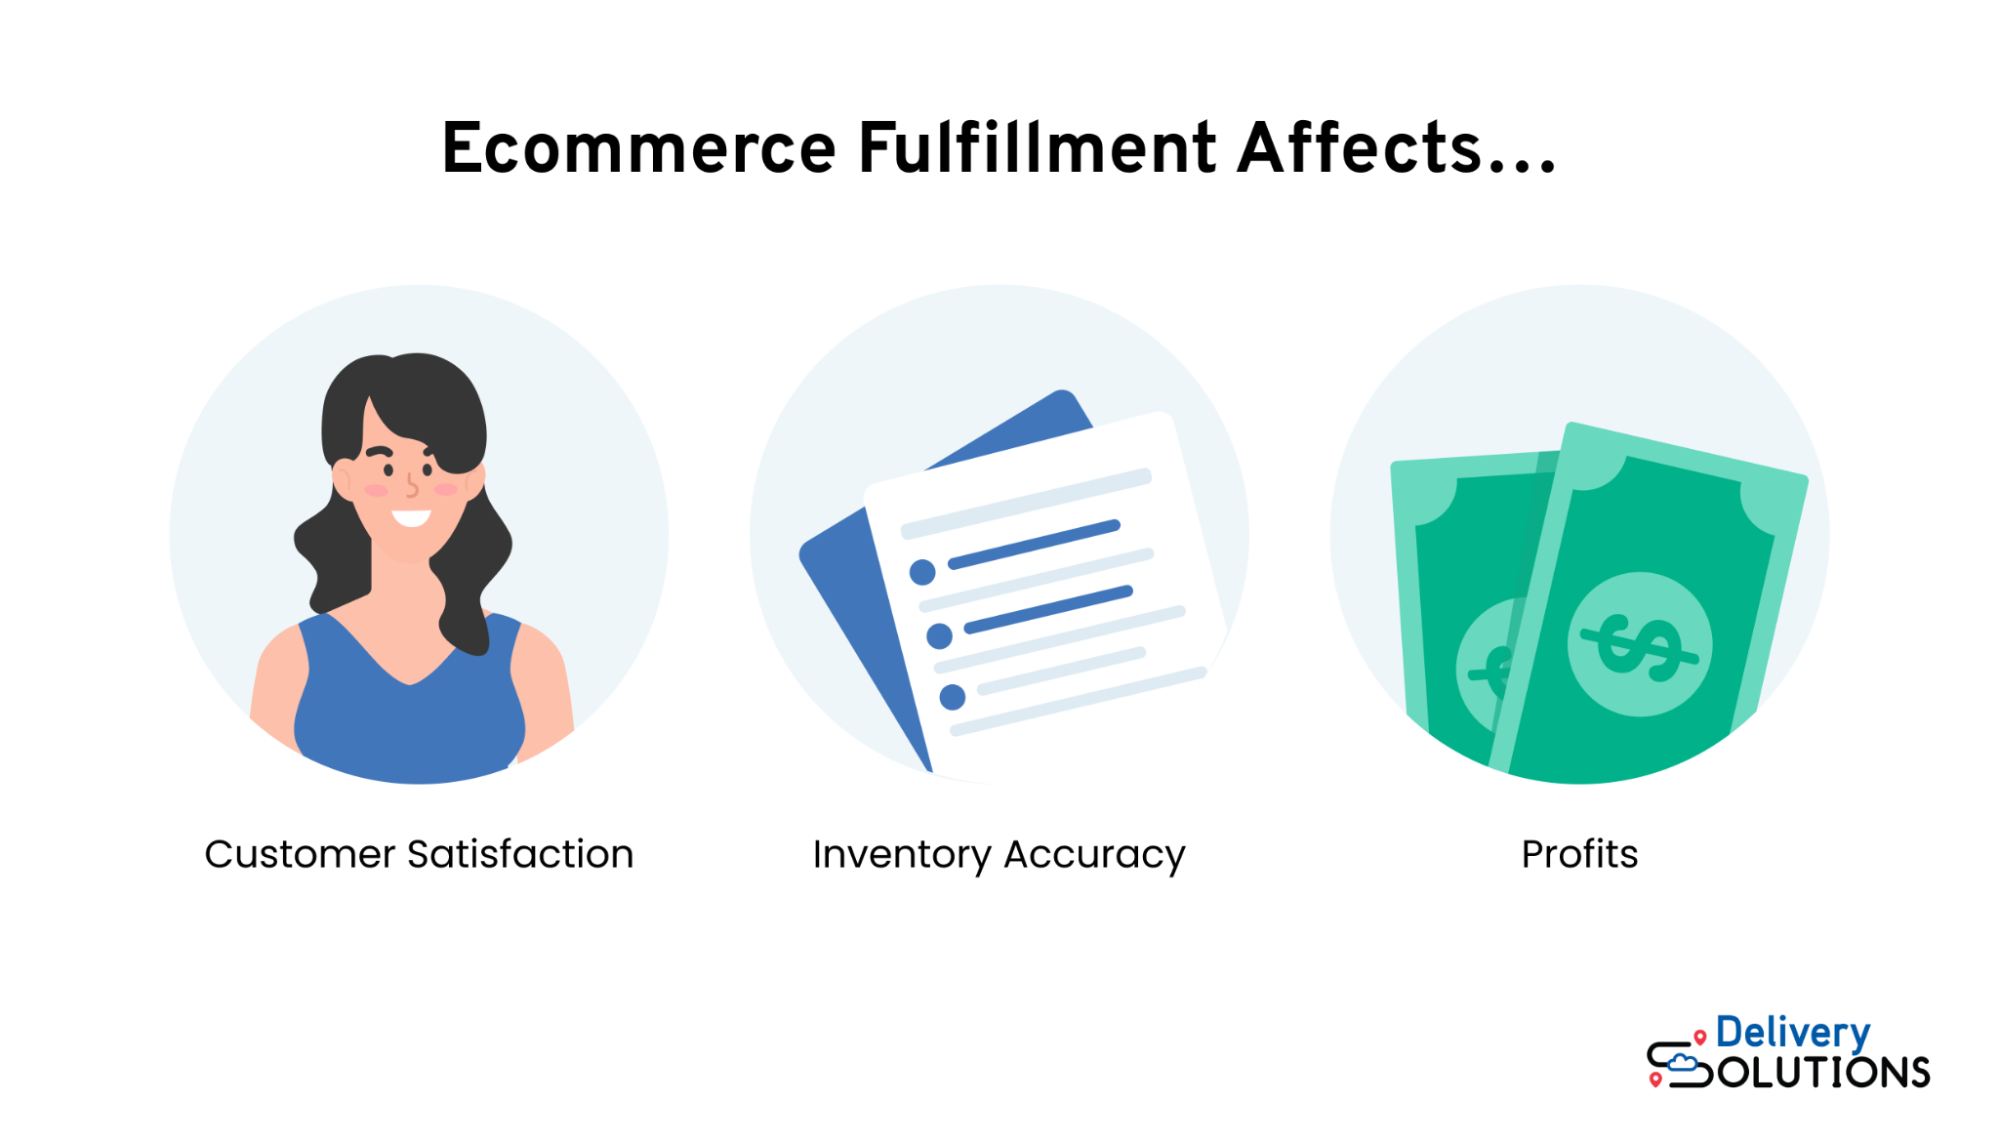 Icons for effects of ecommerce fulfillment